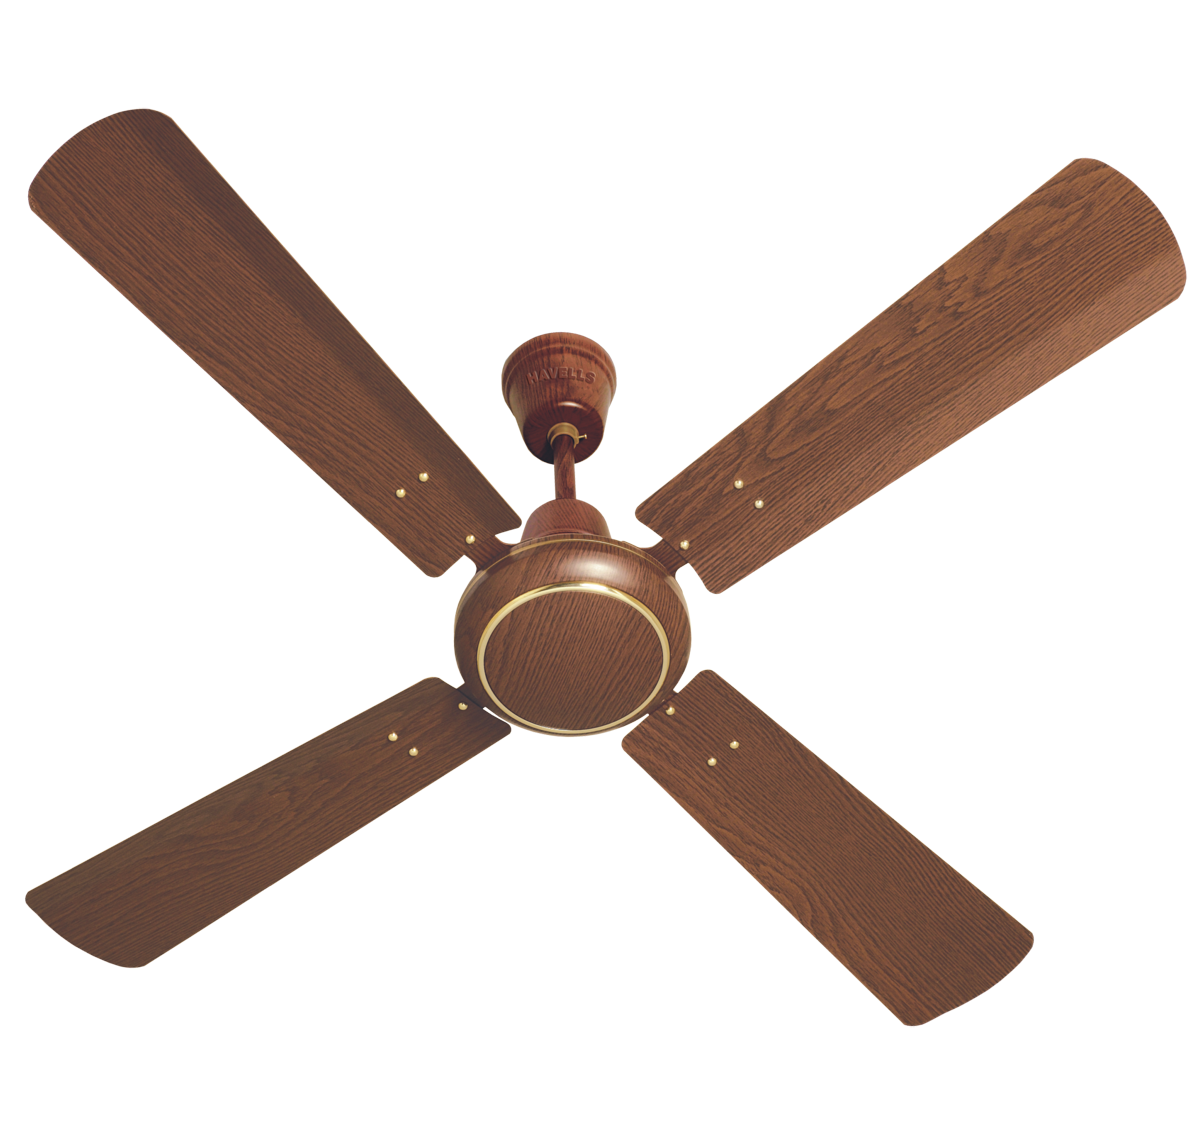 Ceiling png how to. Fan clipart silling